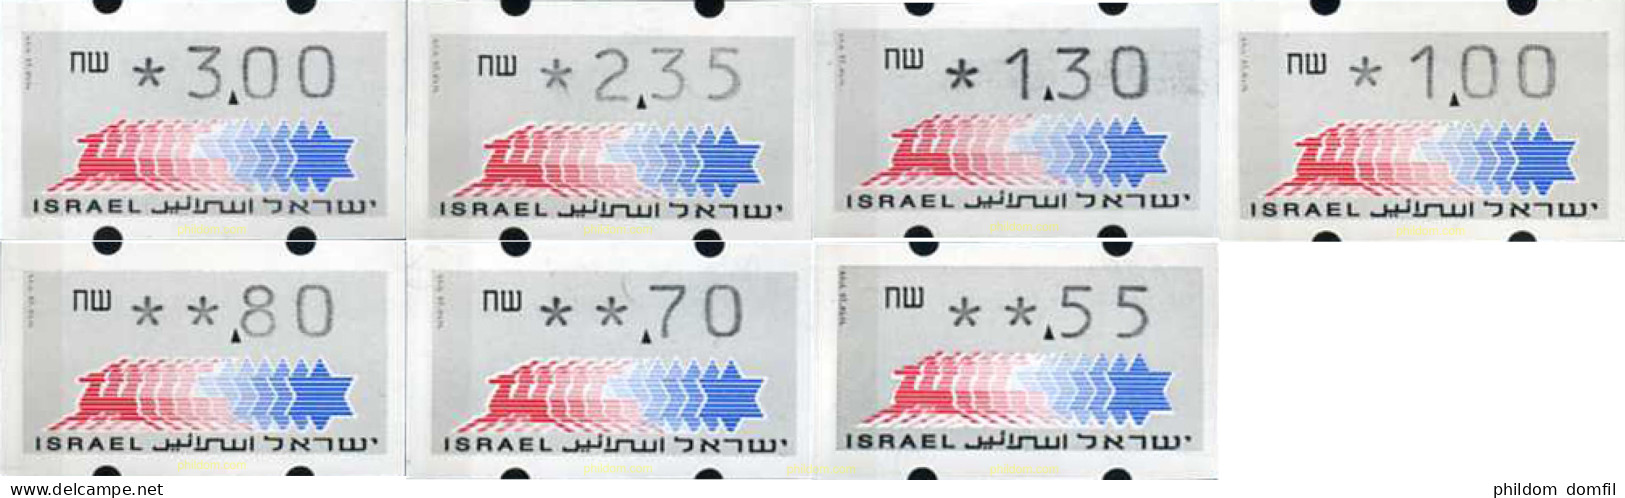 129705 MNH ISRAEL 1990 ETIQUETA DE FRANQUEO - Unused Stamps (without Tabs)